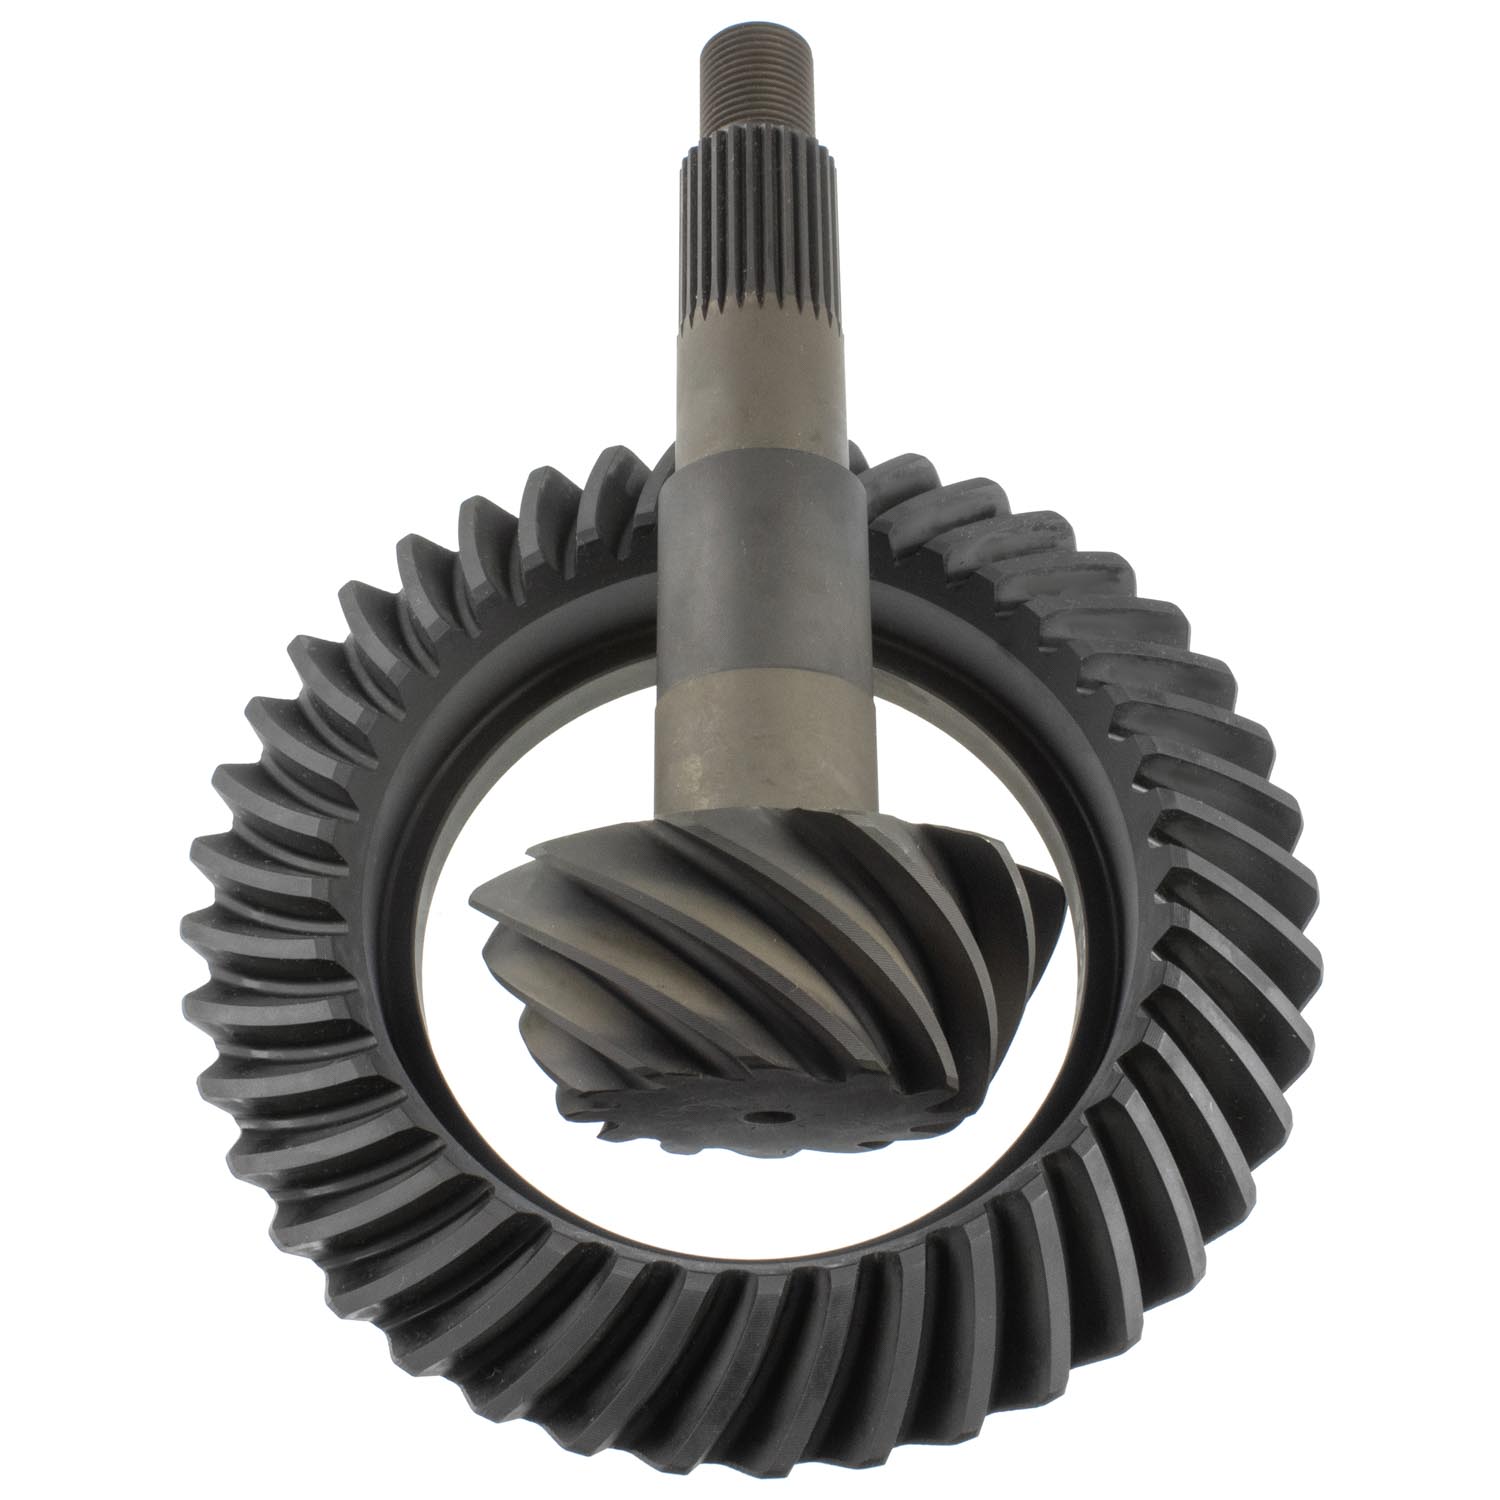 1 Pack Richmond Gear 49-0001-1 Ring and Pinion GM 7.5 7.625 3.08 Ring Ratio 